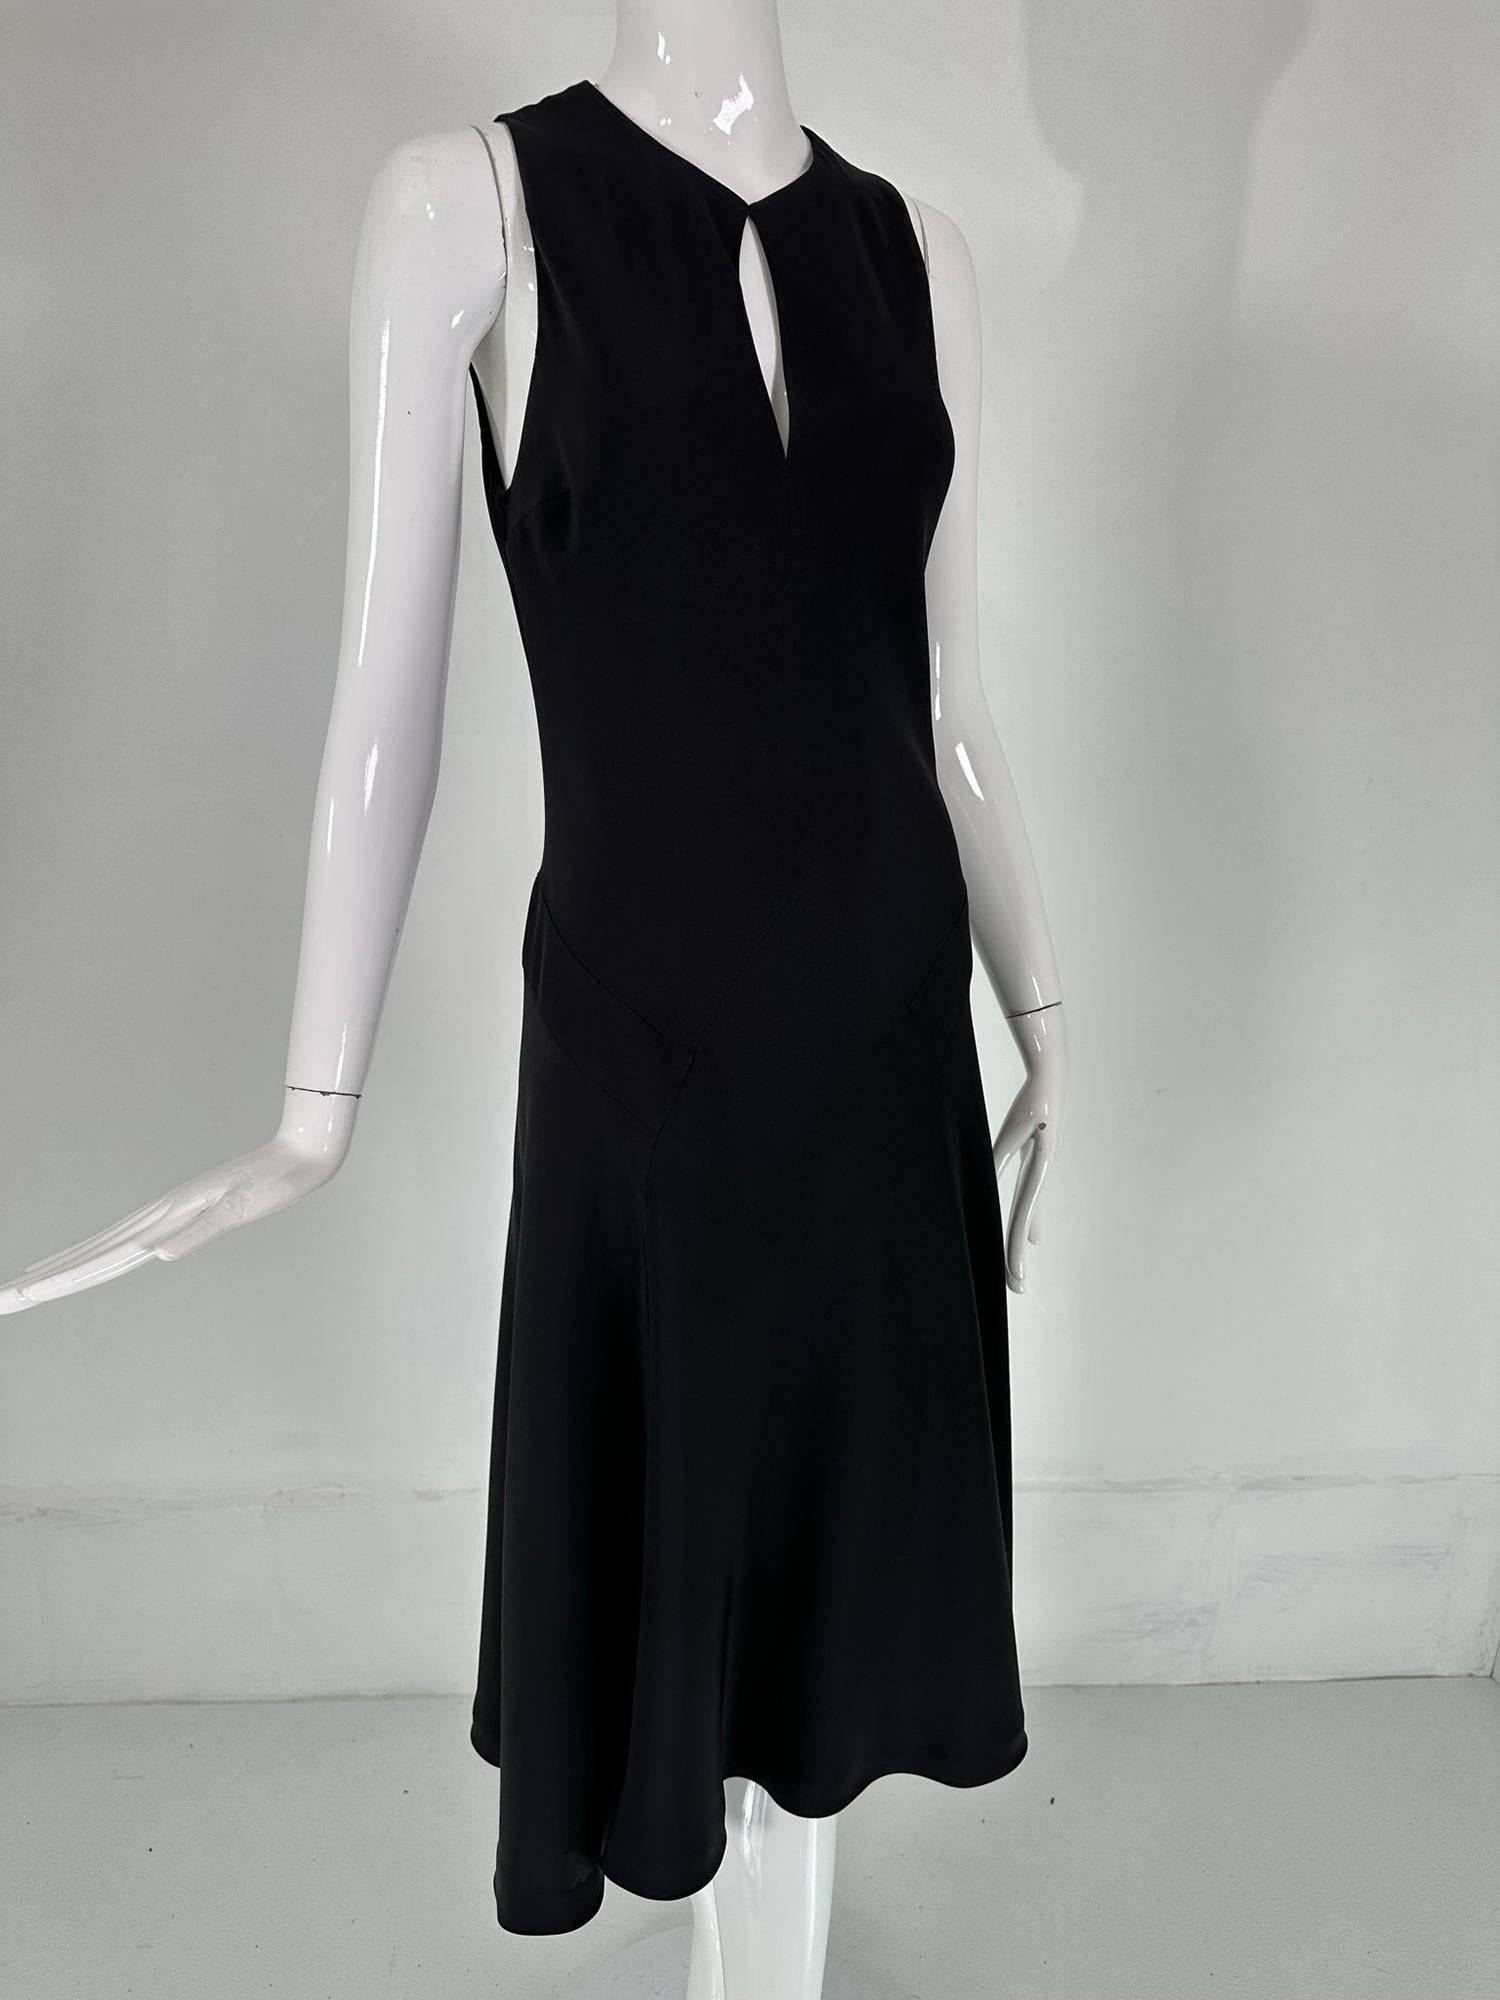 Ralph Lauren Black Label classic silk bias cut dress marked size 8. No one interprets the classic style like Ralph Lauren & this little black dress is an example of his best. A bit of the early 1930s with its intricate bias piecing the allows the